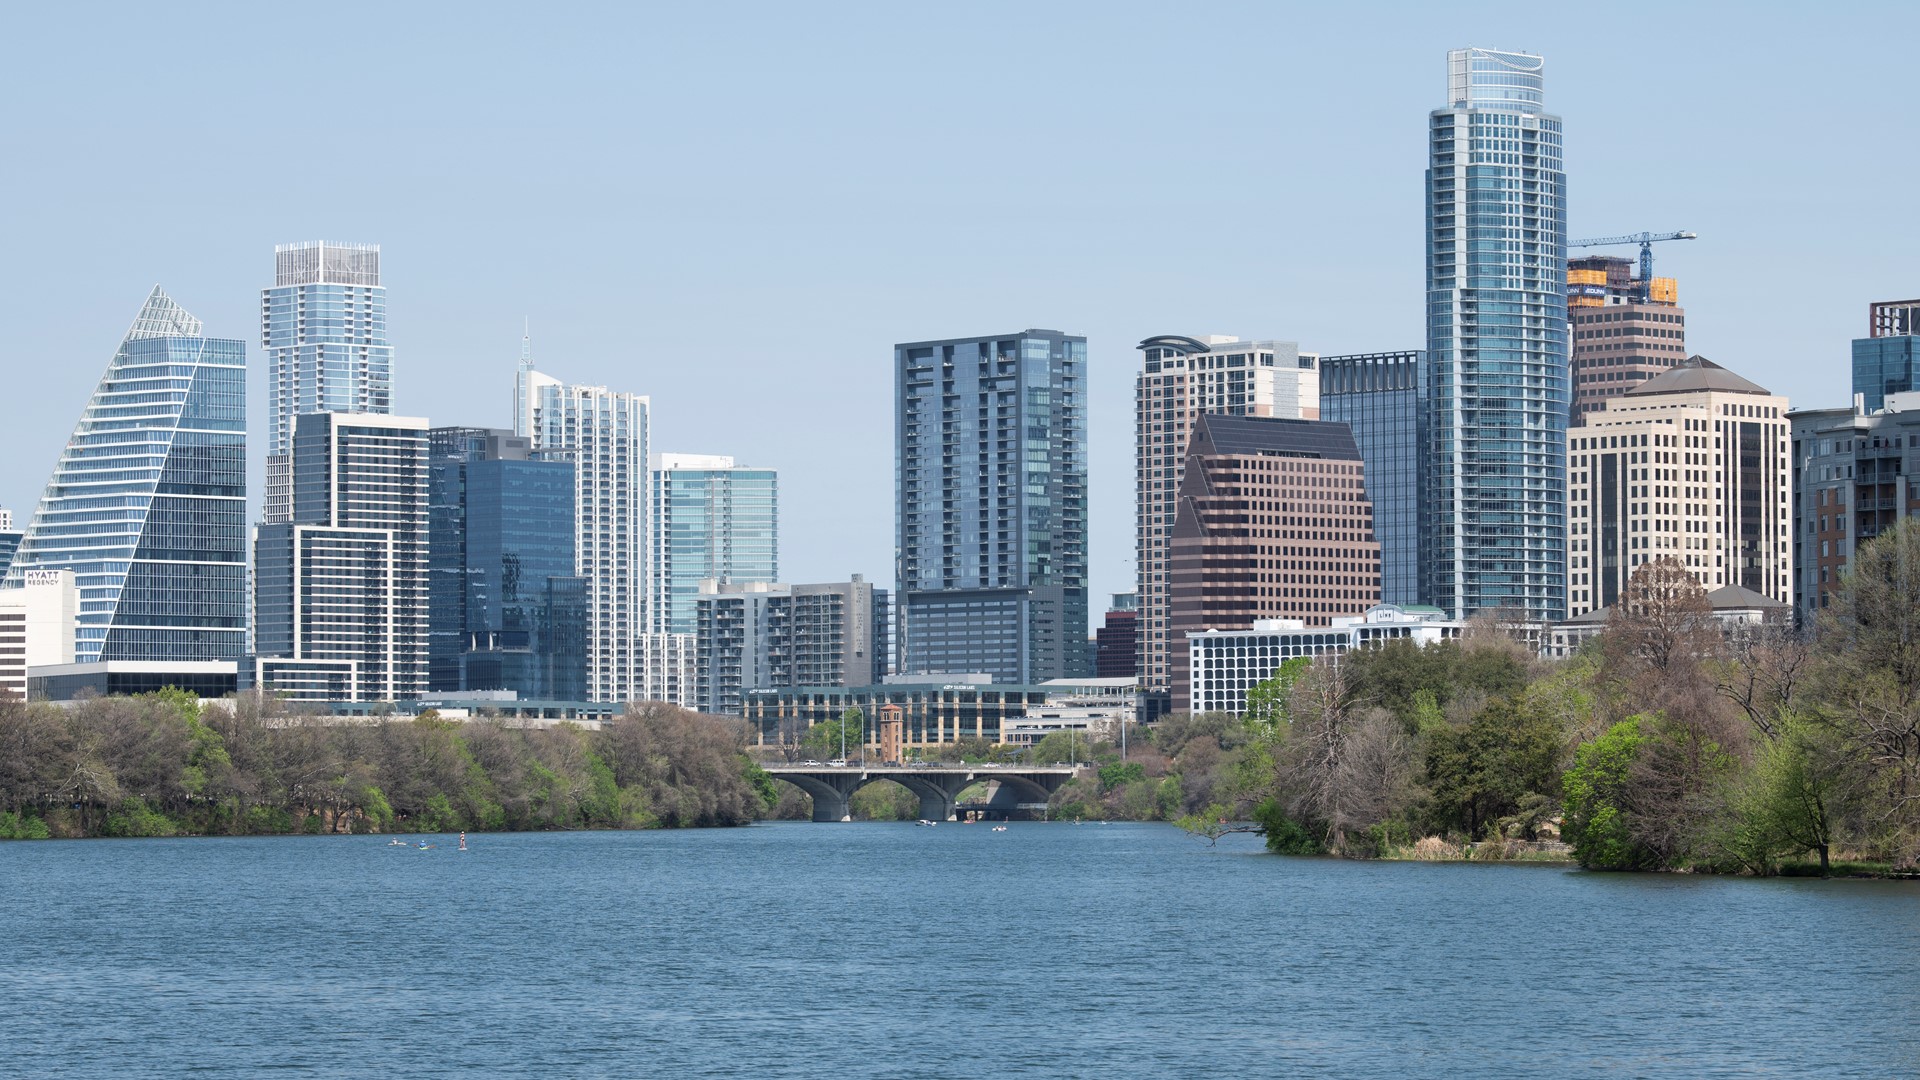 A shortage of housing combined with the relatively slower growth of wages has led to a financial division in Austin, according to the city's demographer.